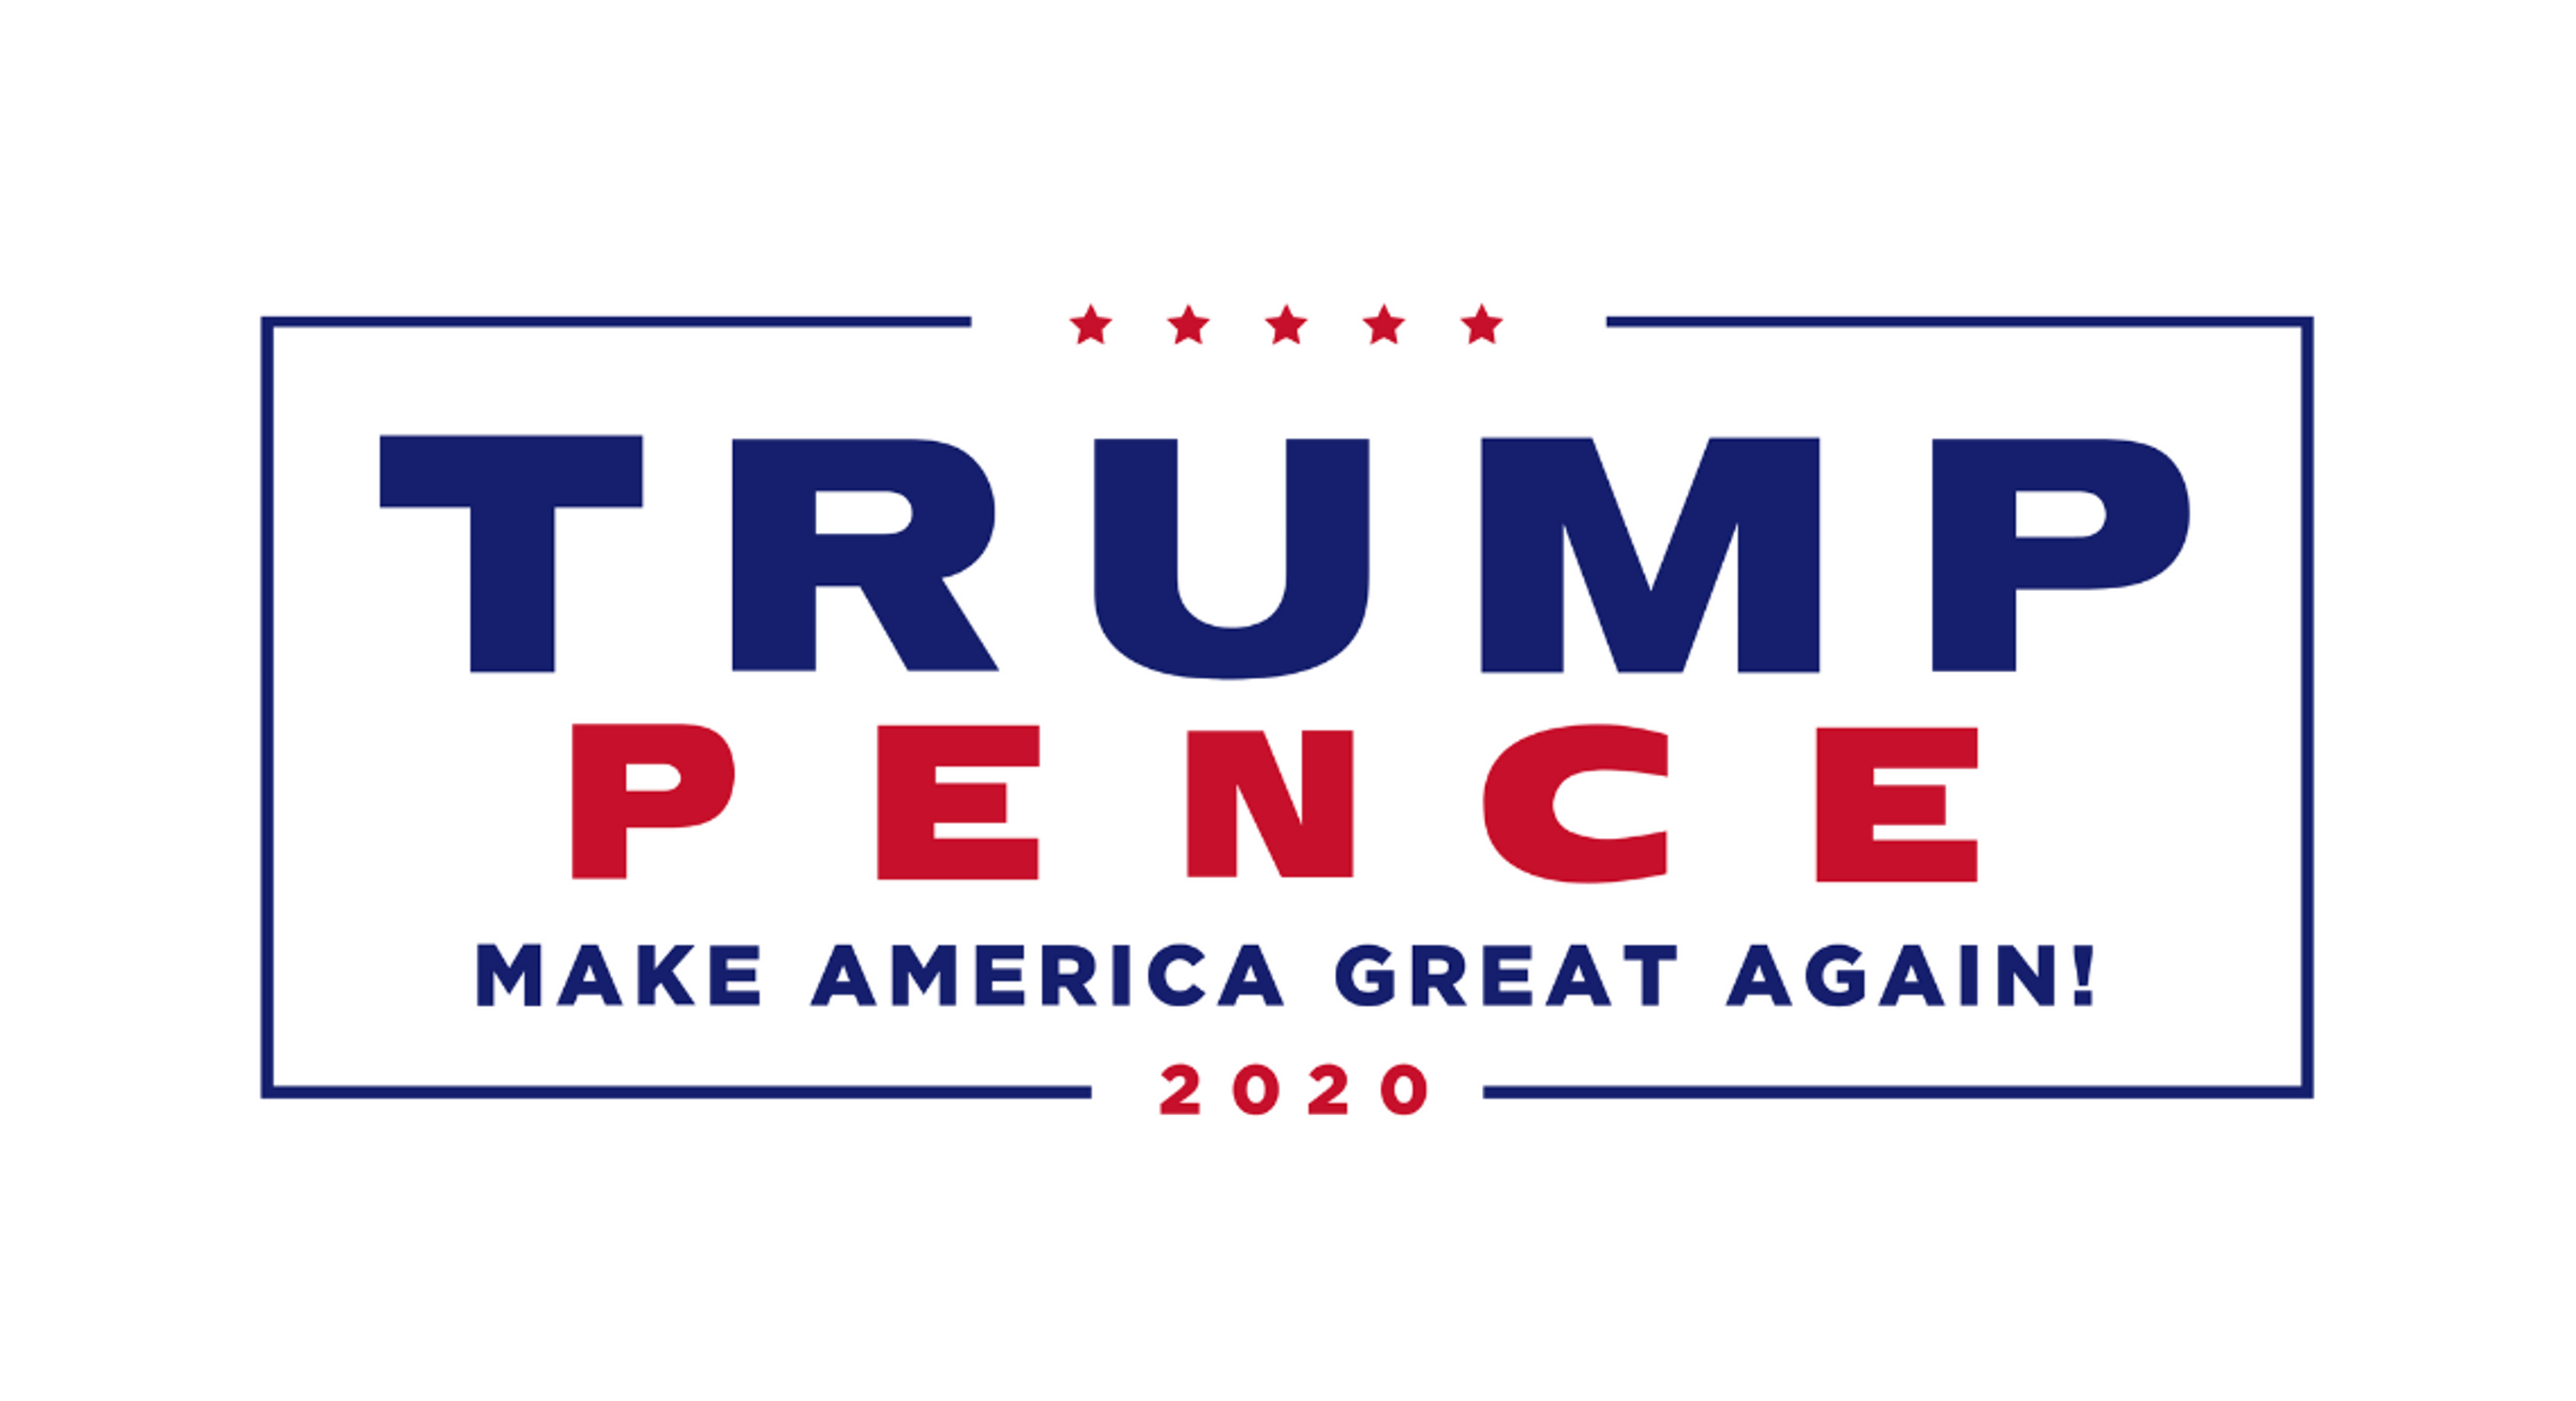 The Design Behind the Trump - Pence 2020 Campaign Logo